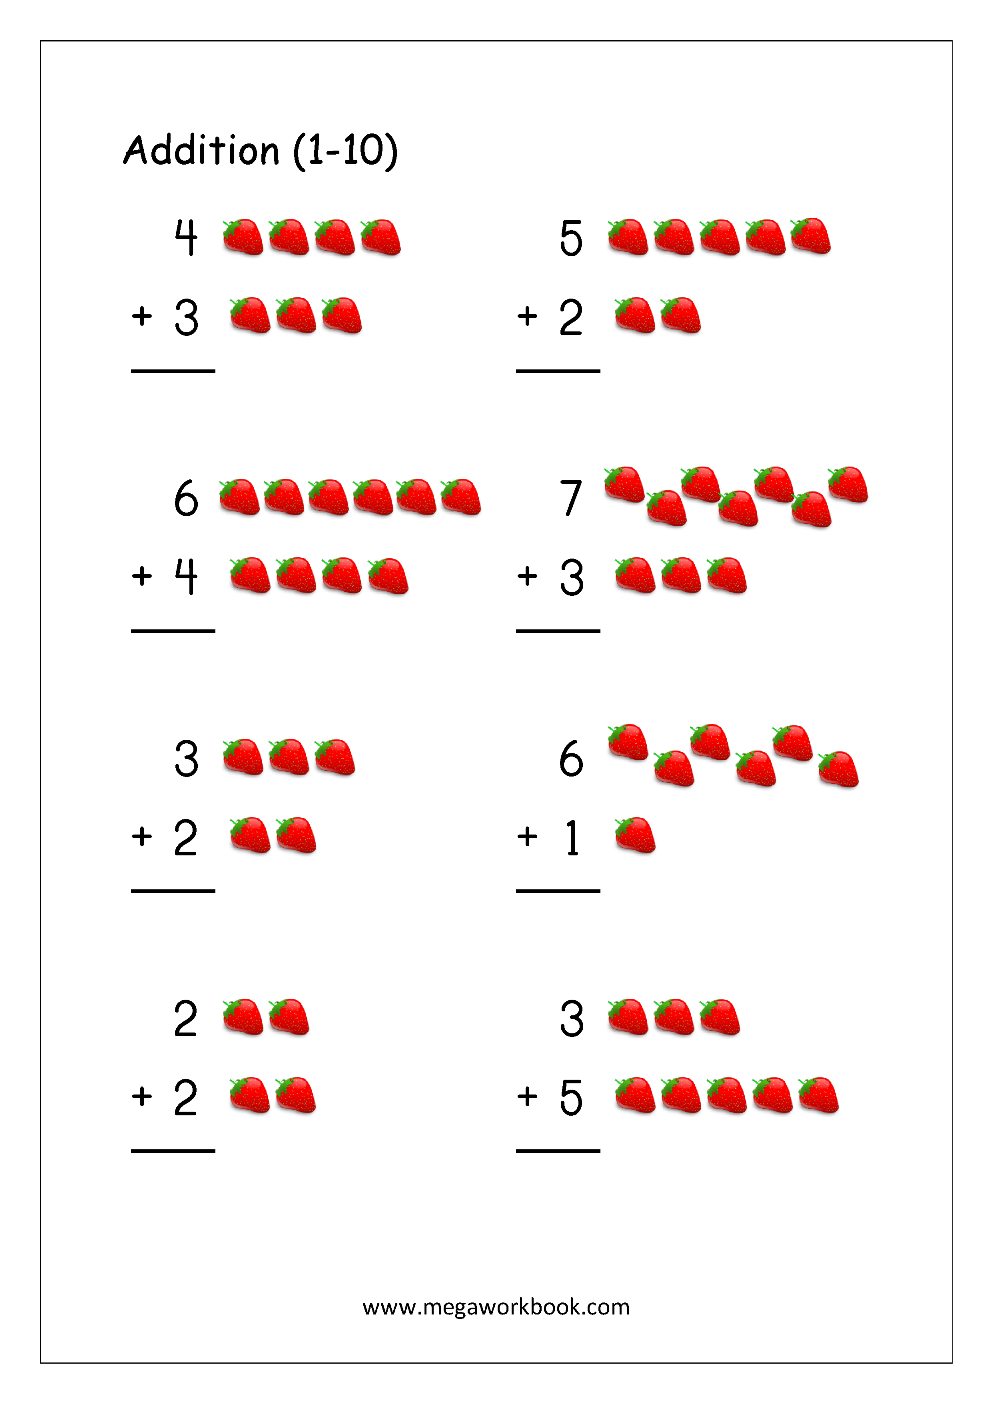 addition-touch-math-worksheets-3-touch-math-addition-worksheets-touchmath-t-o-s-review-my